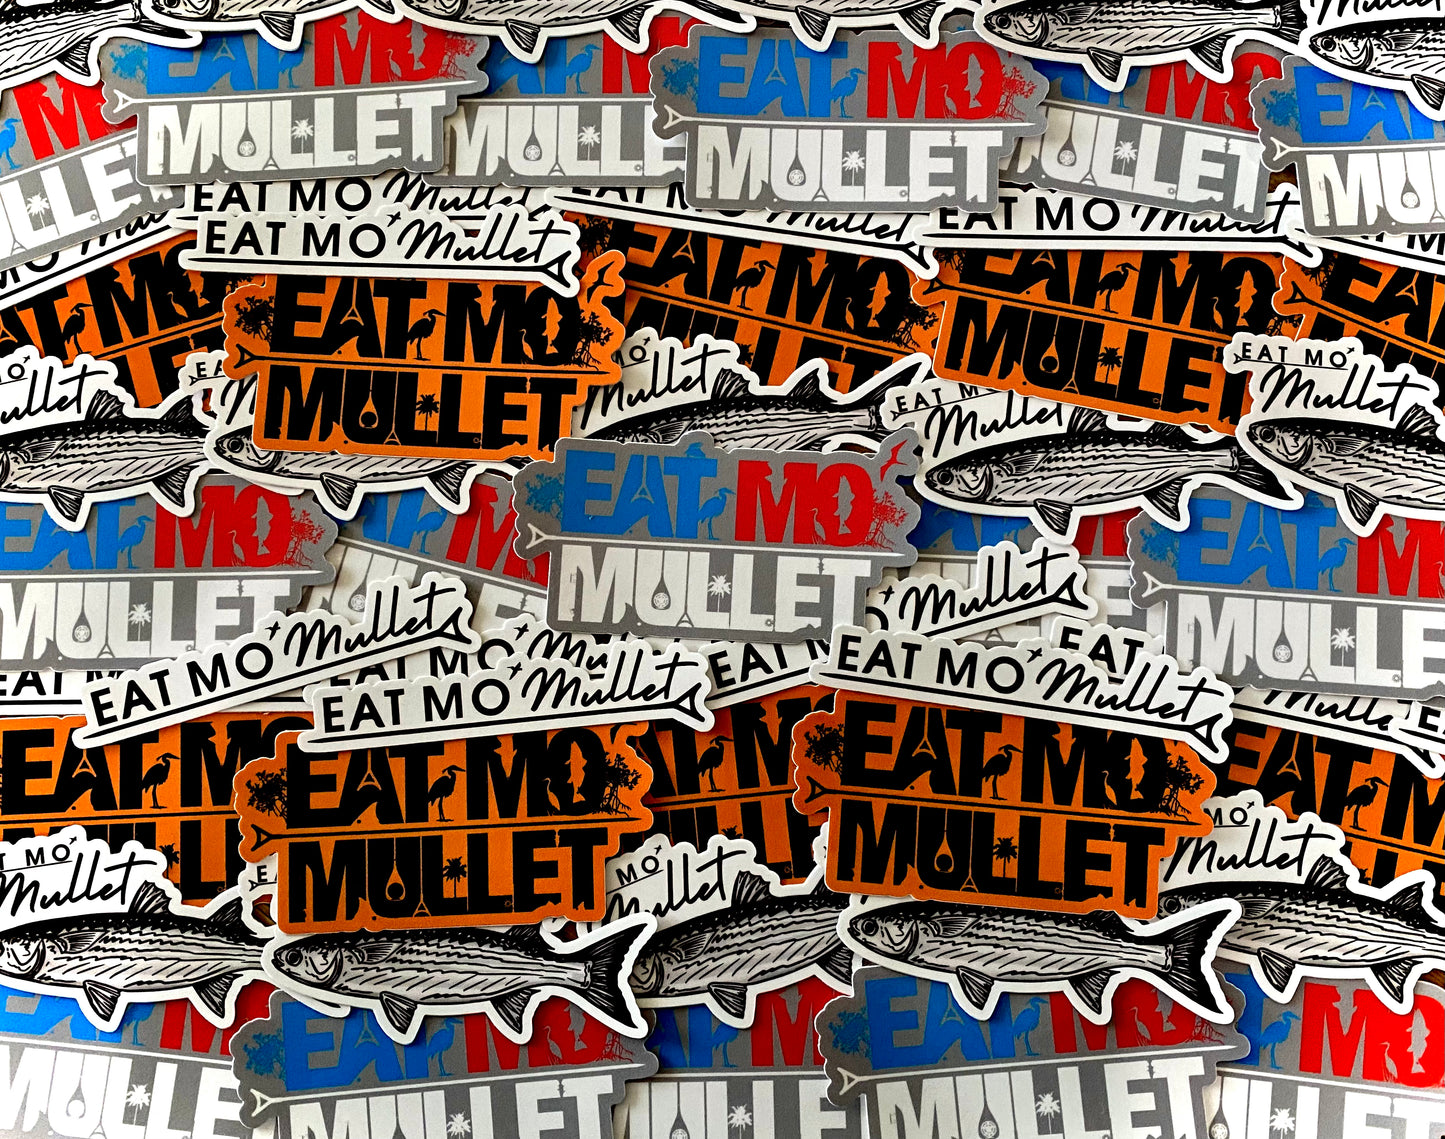 Mullet Stickers